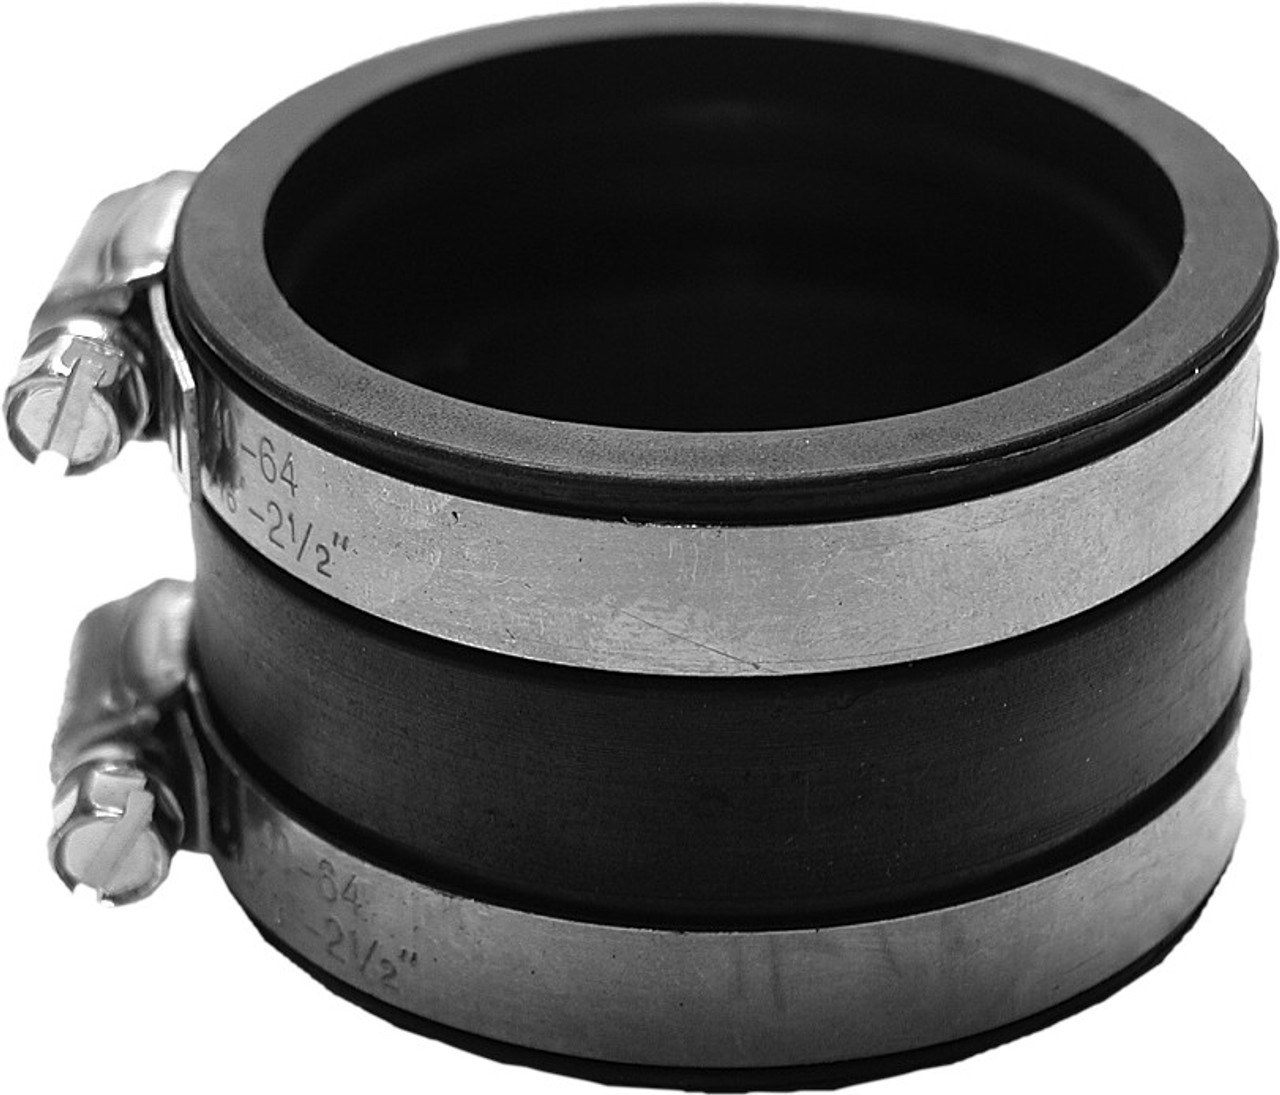 Replacement Intake Mounting Flange compatible with Ski Doo Part# 12-14779 OEM# 570-0164-00